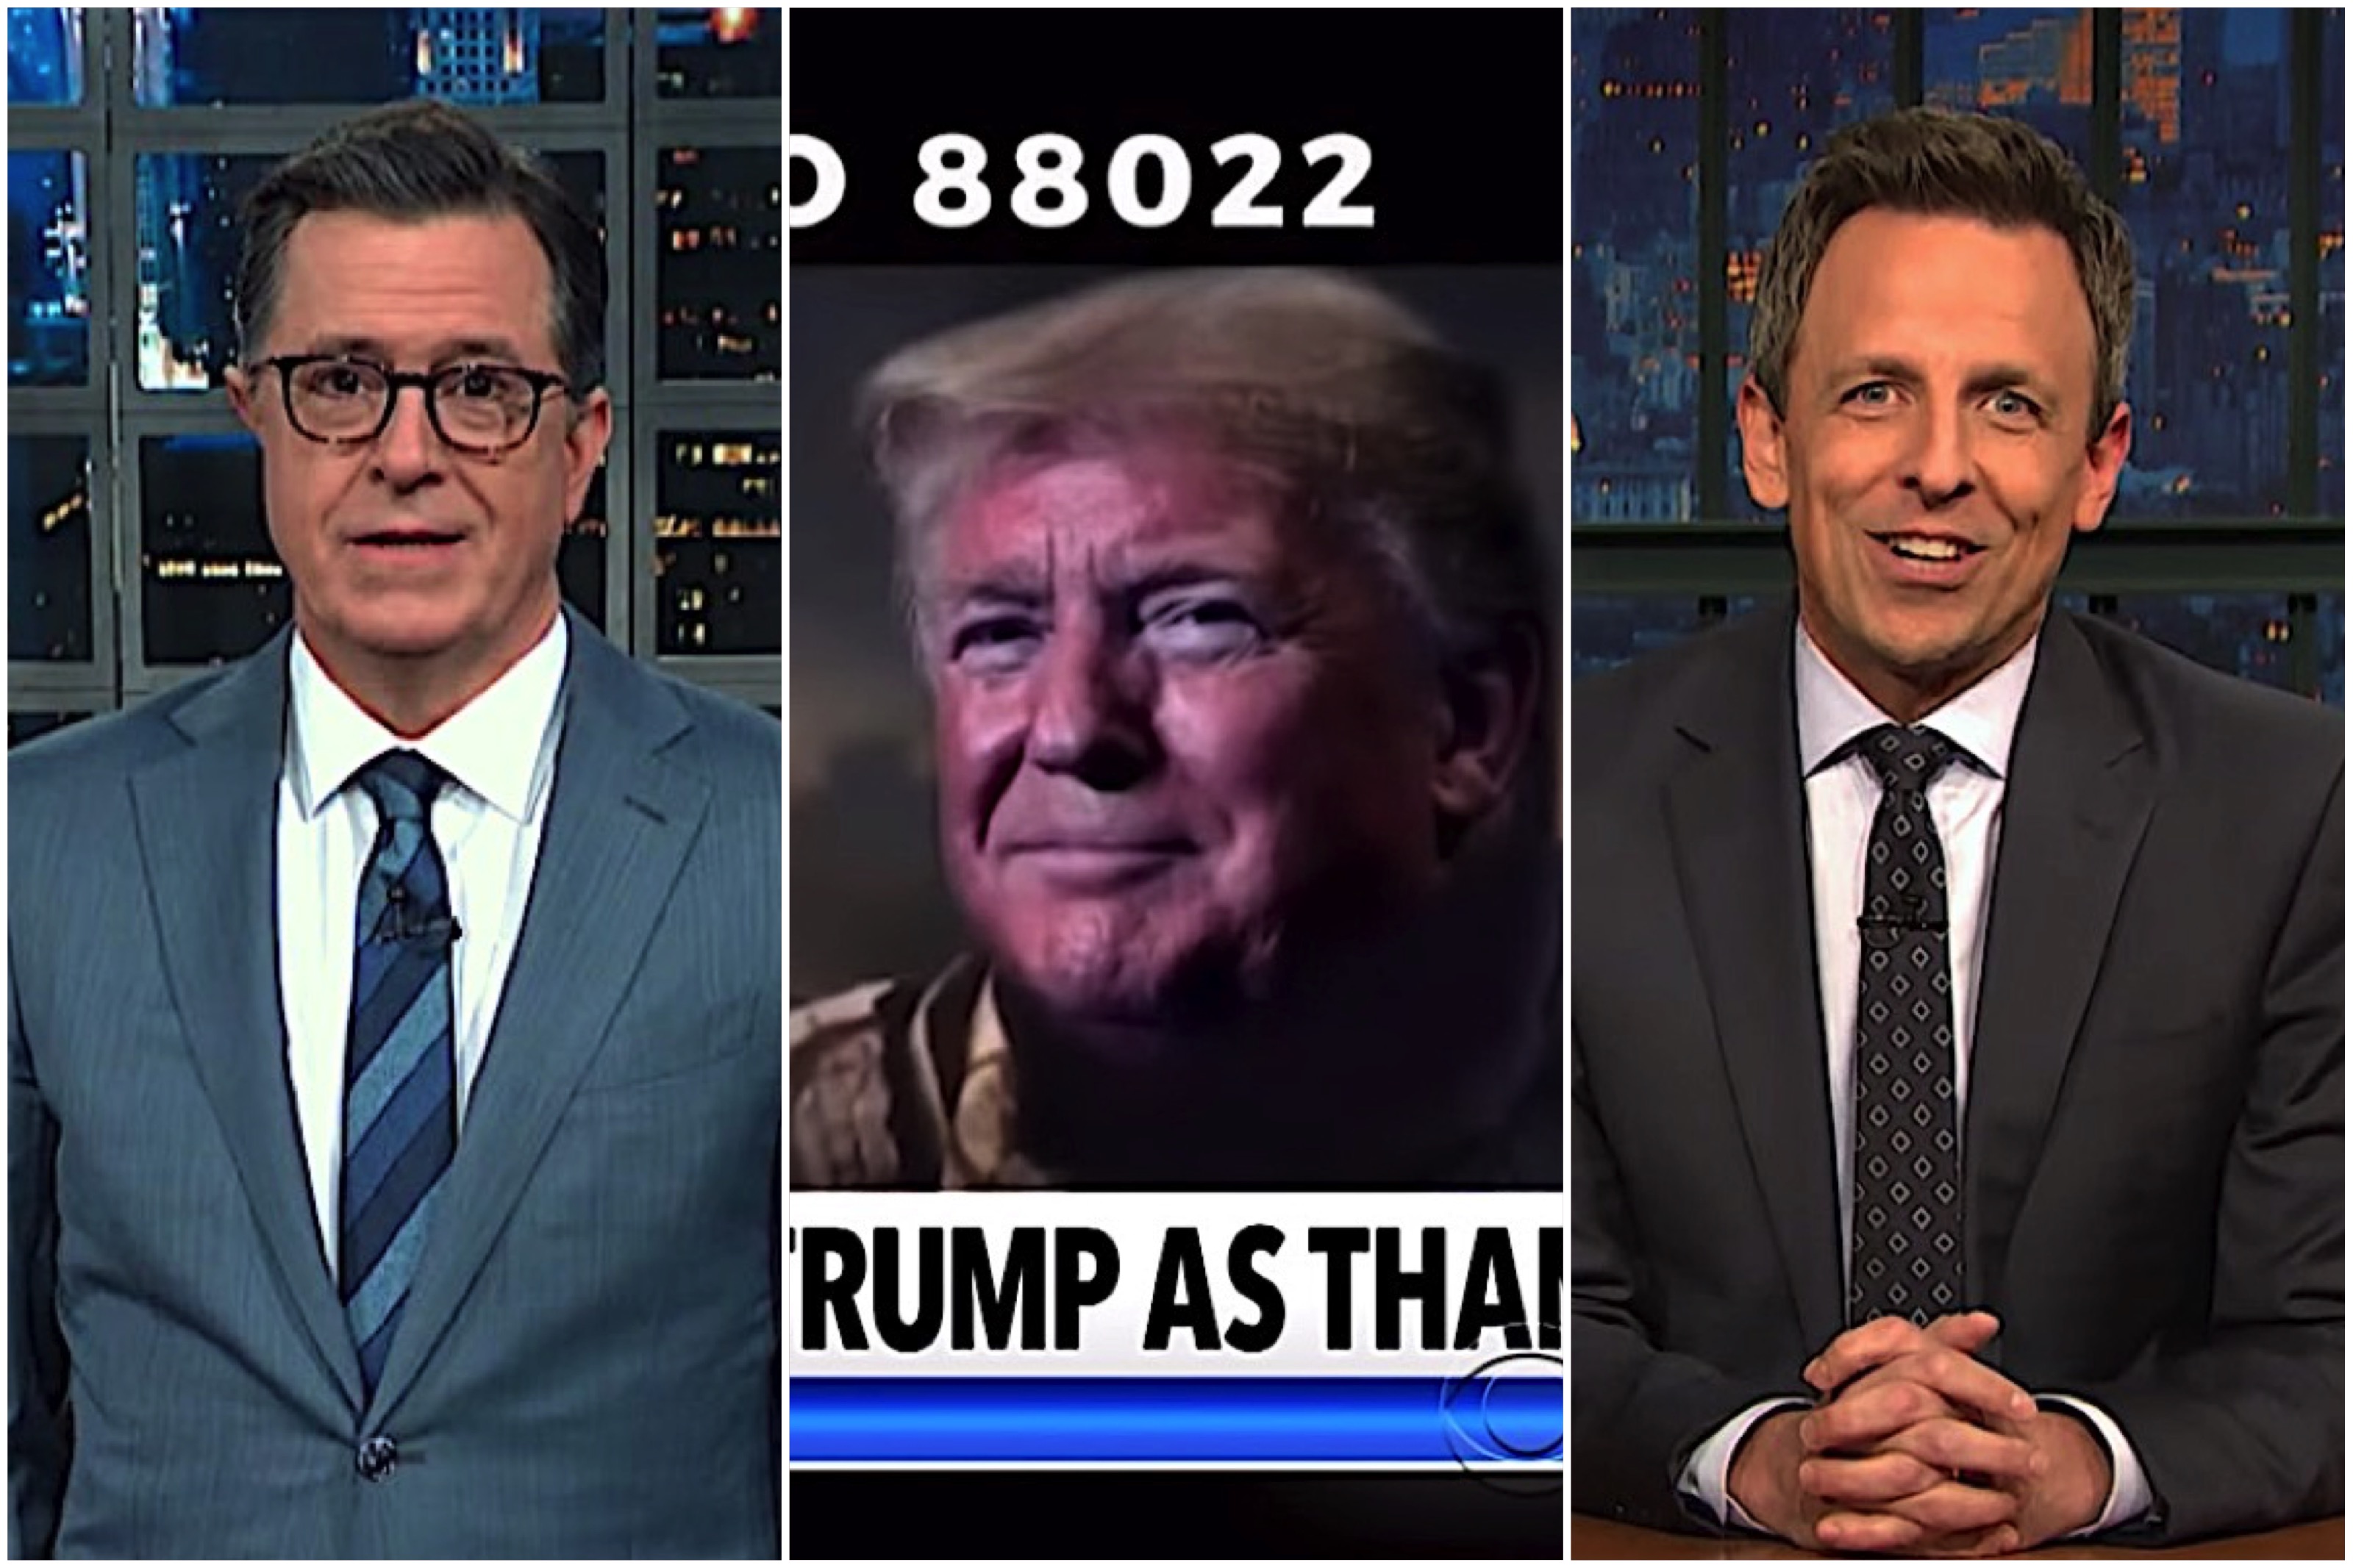 Stephen Colbert and Seth Meyers on Trump and impeachment